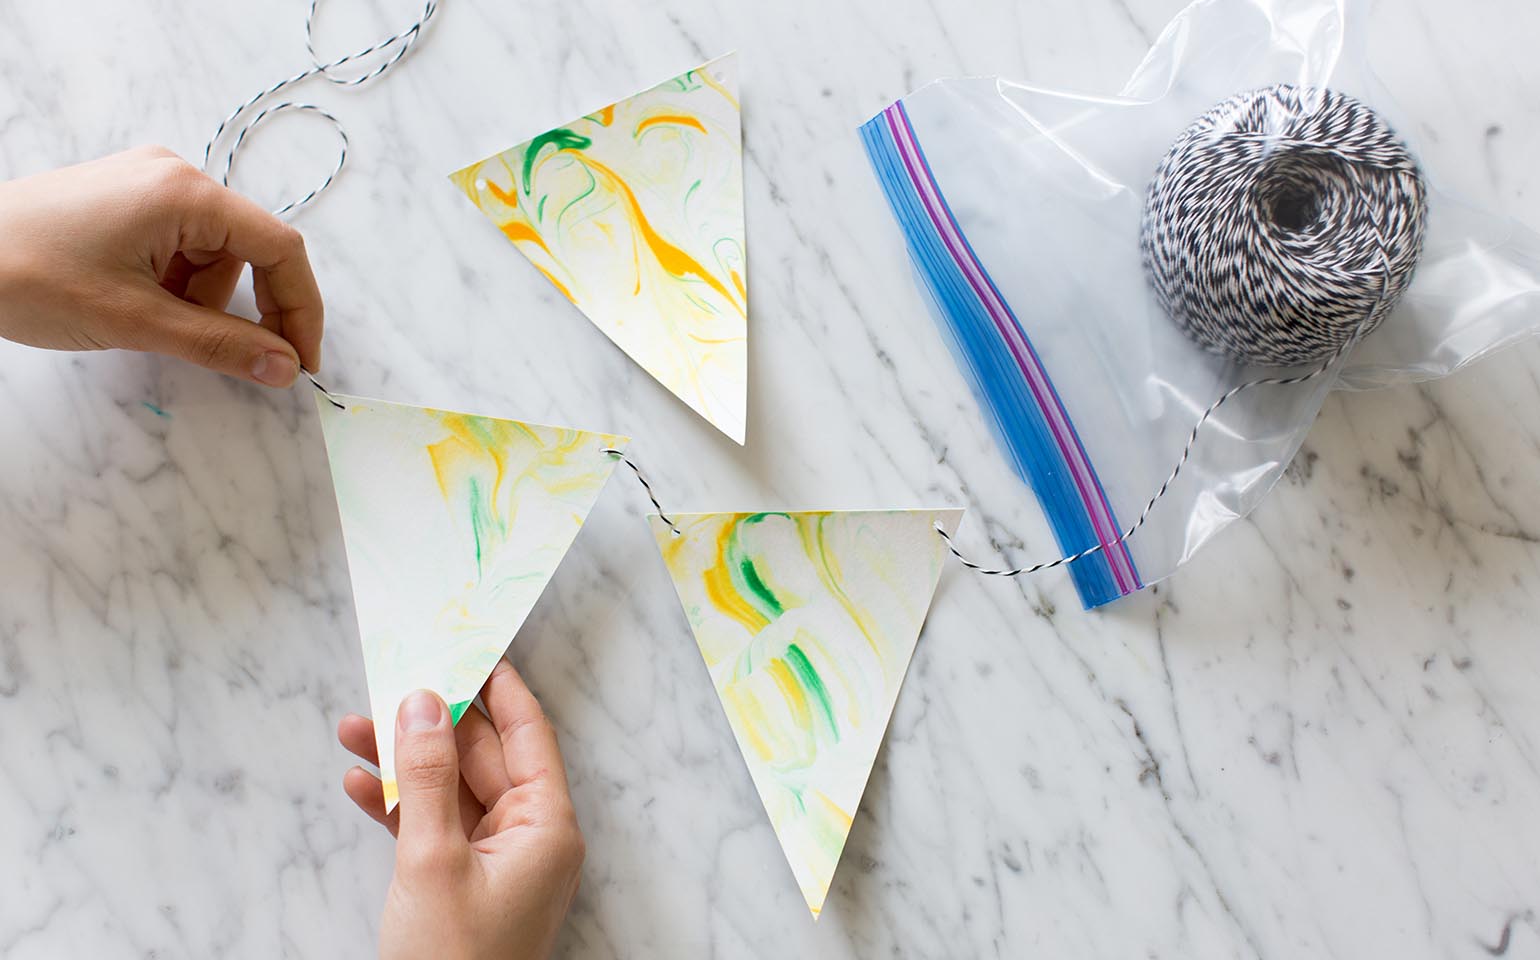 Summer Party Ideas from Ziploc® brand